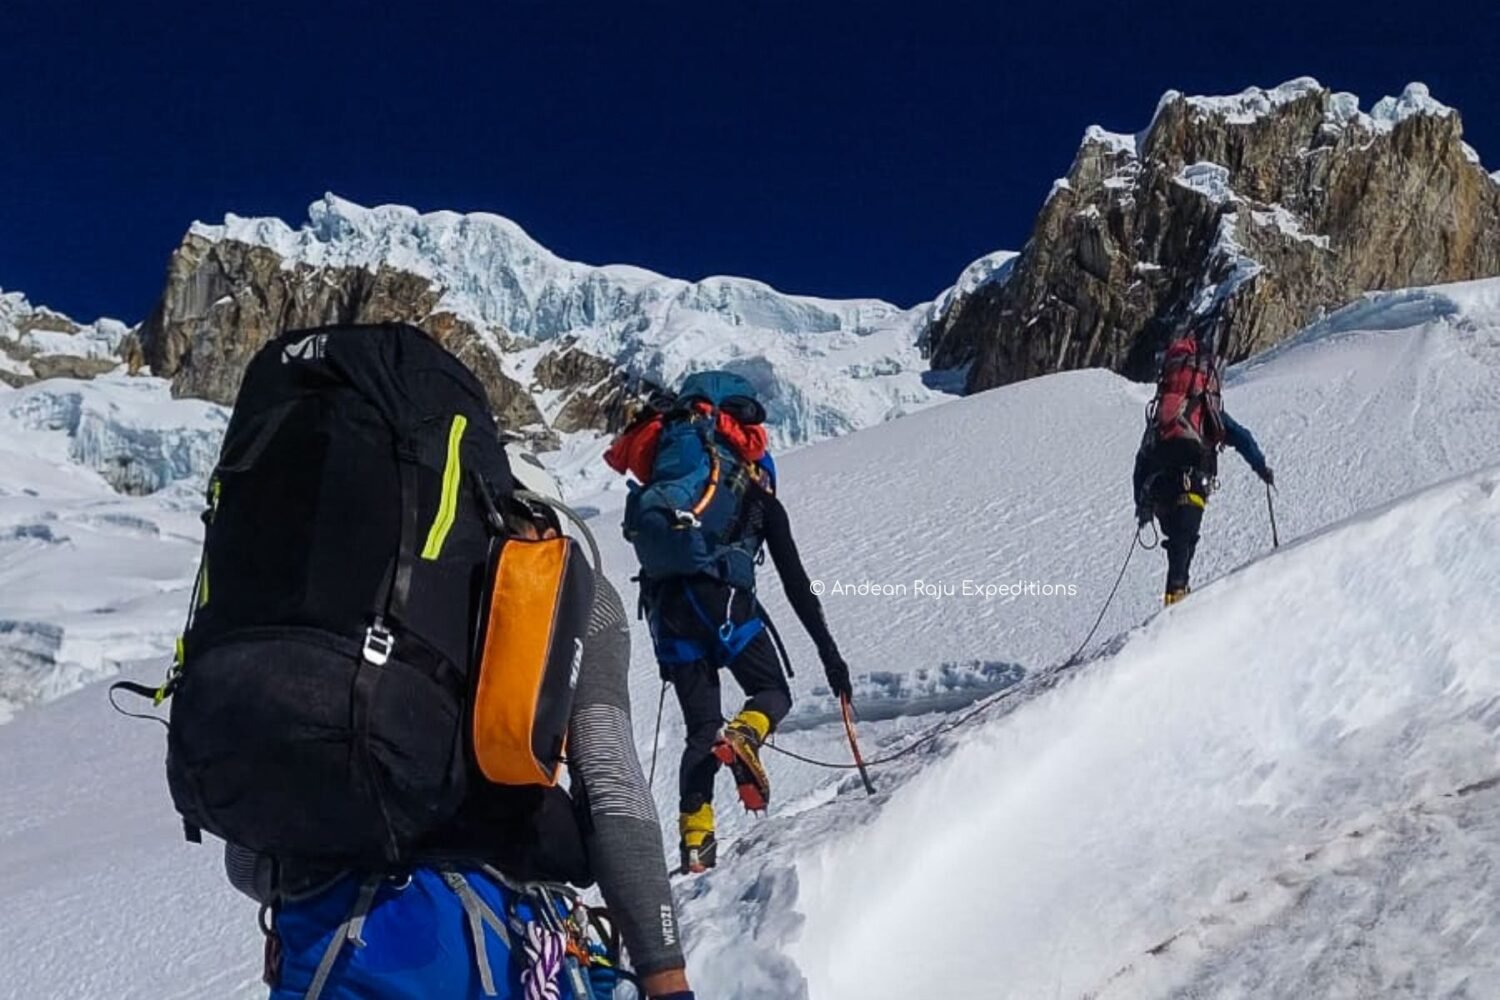 Ascending to High Camp